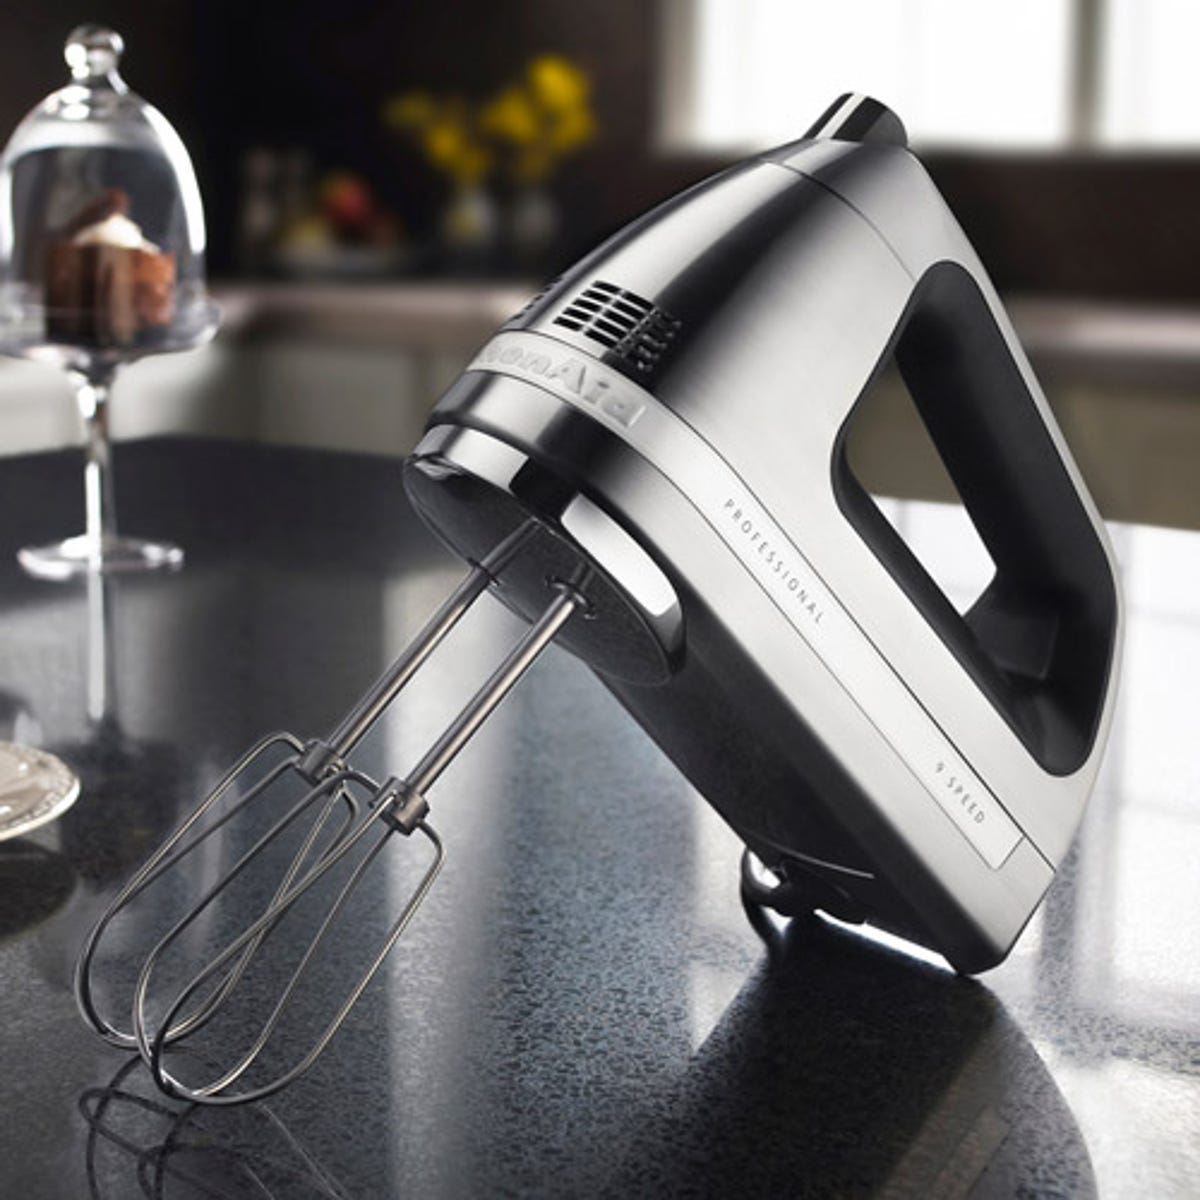 Hand mixer takes it to the next level - CNET